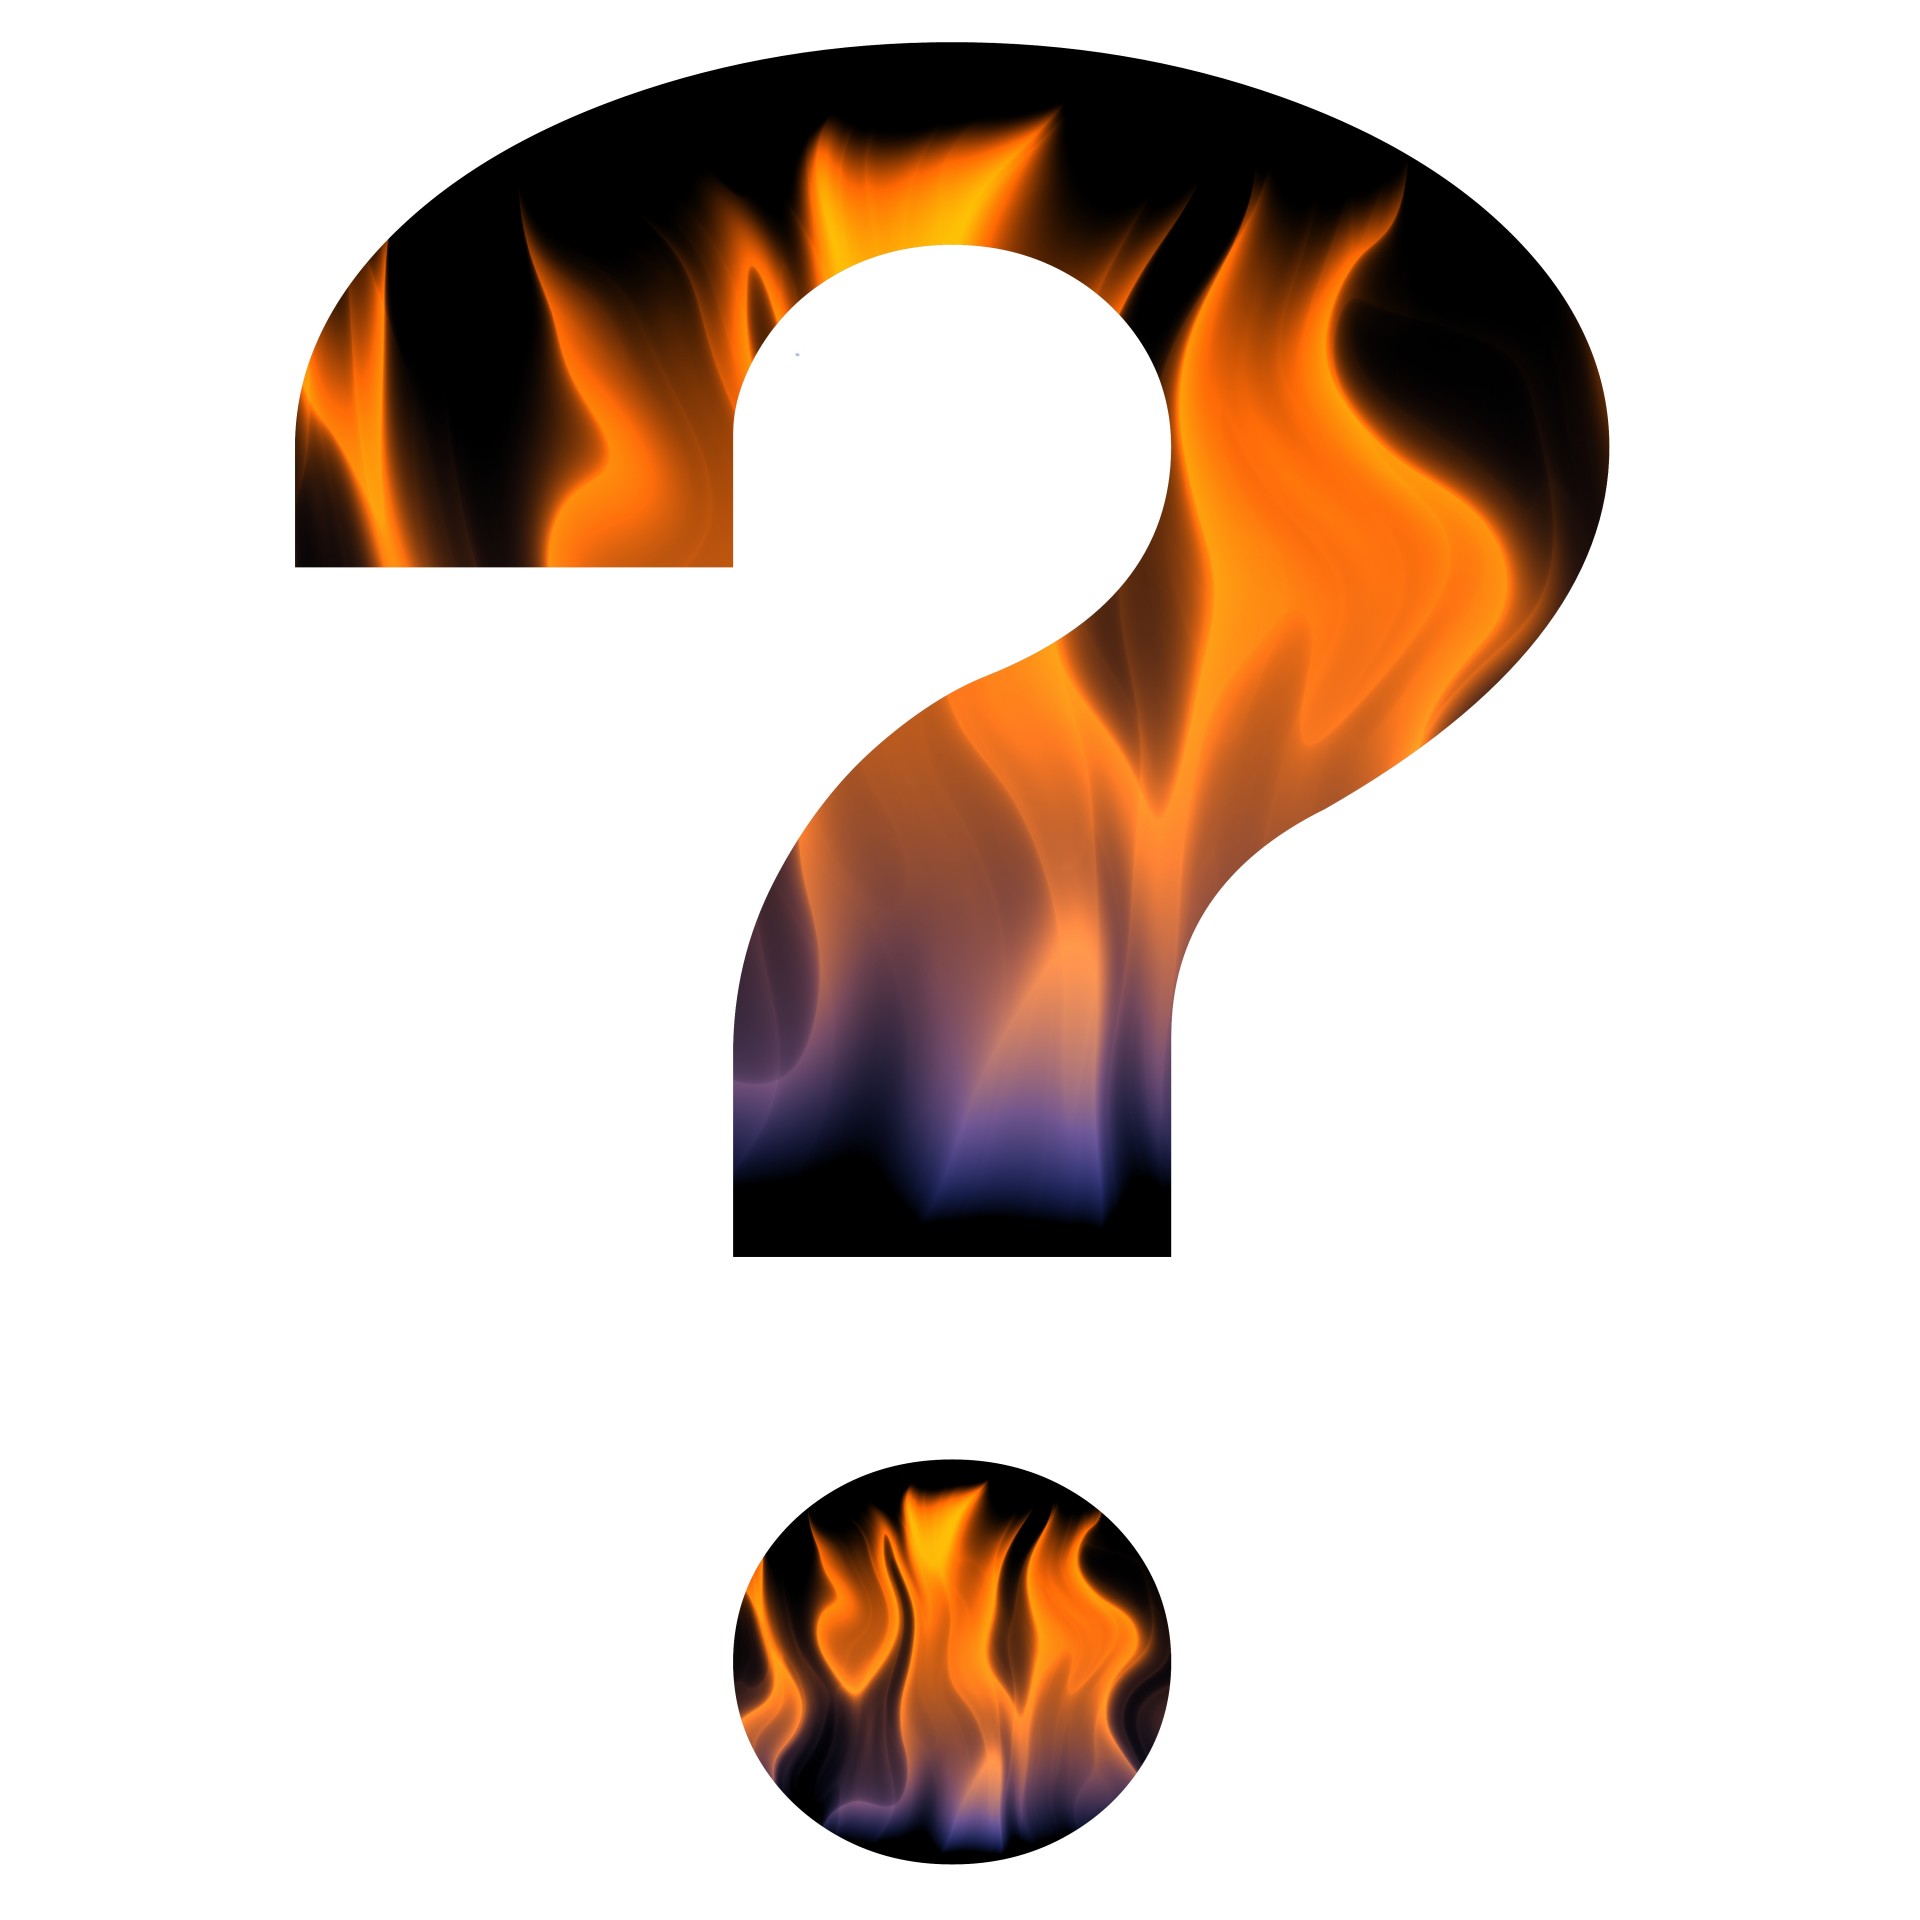 question mark with fiery background